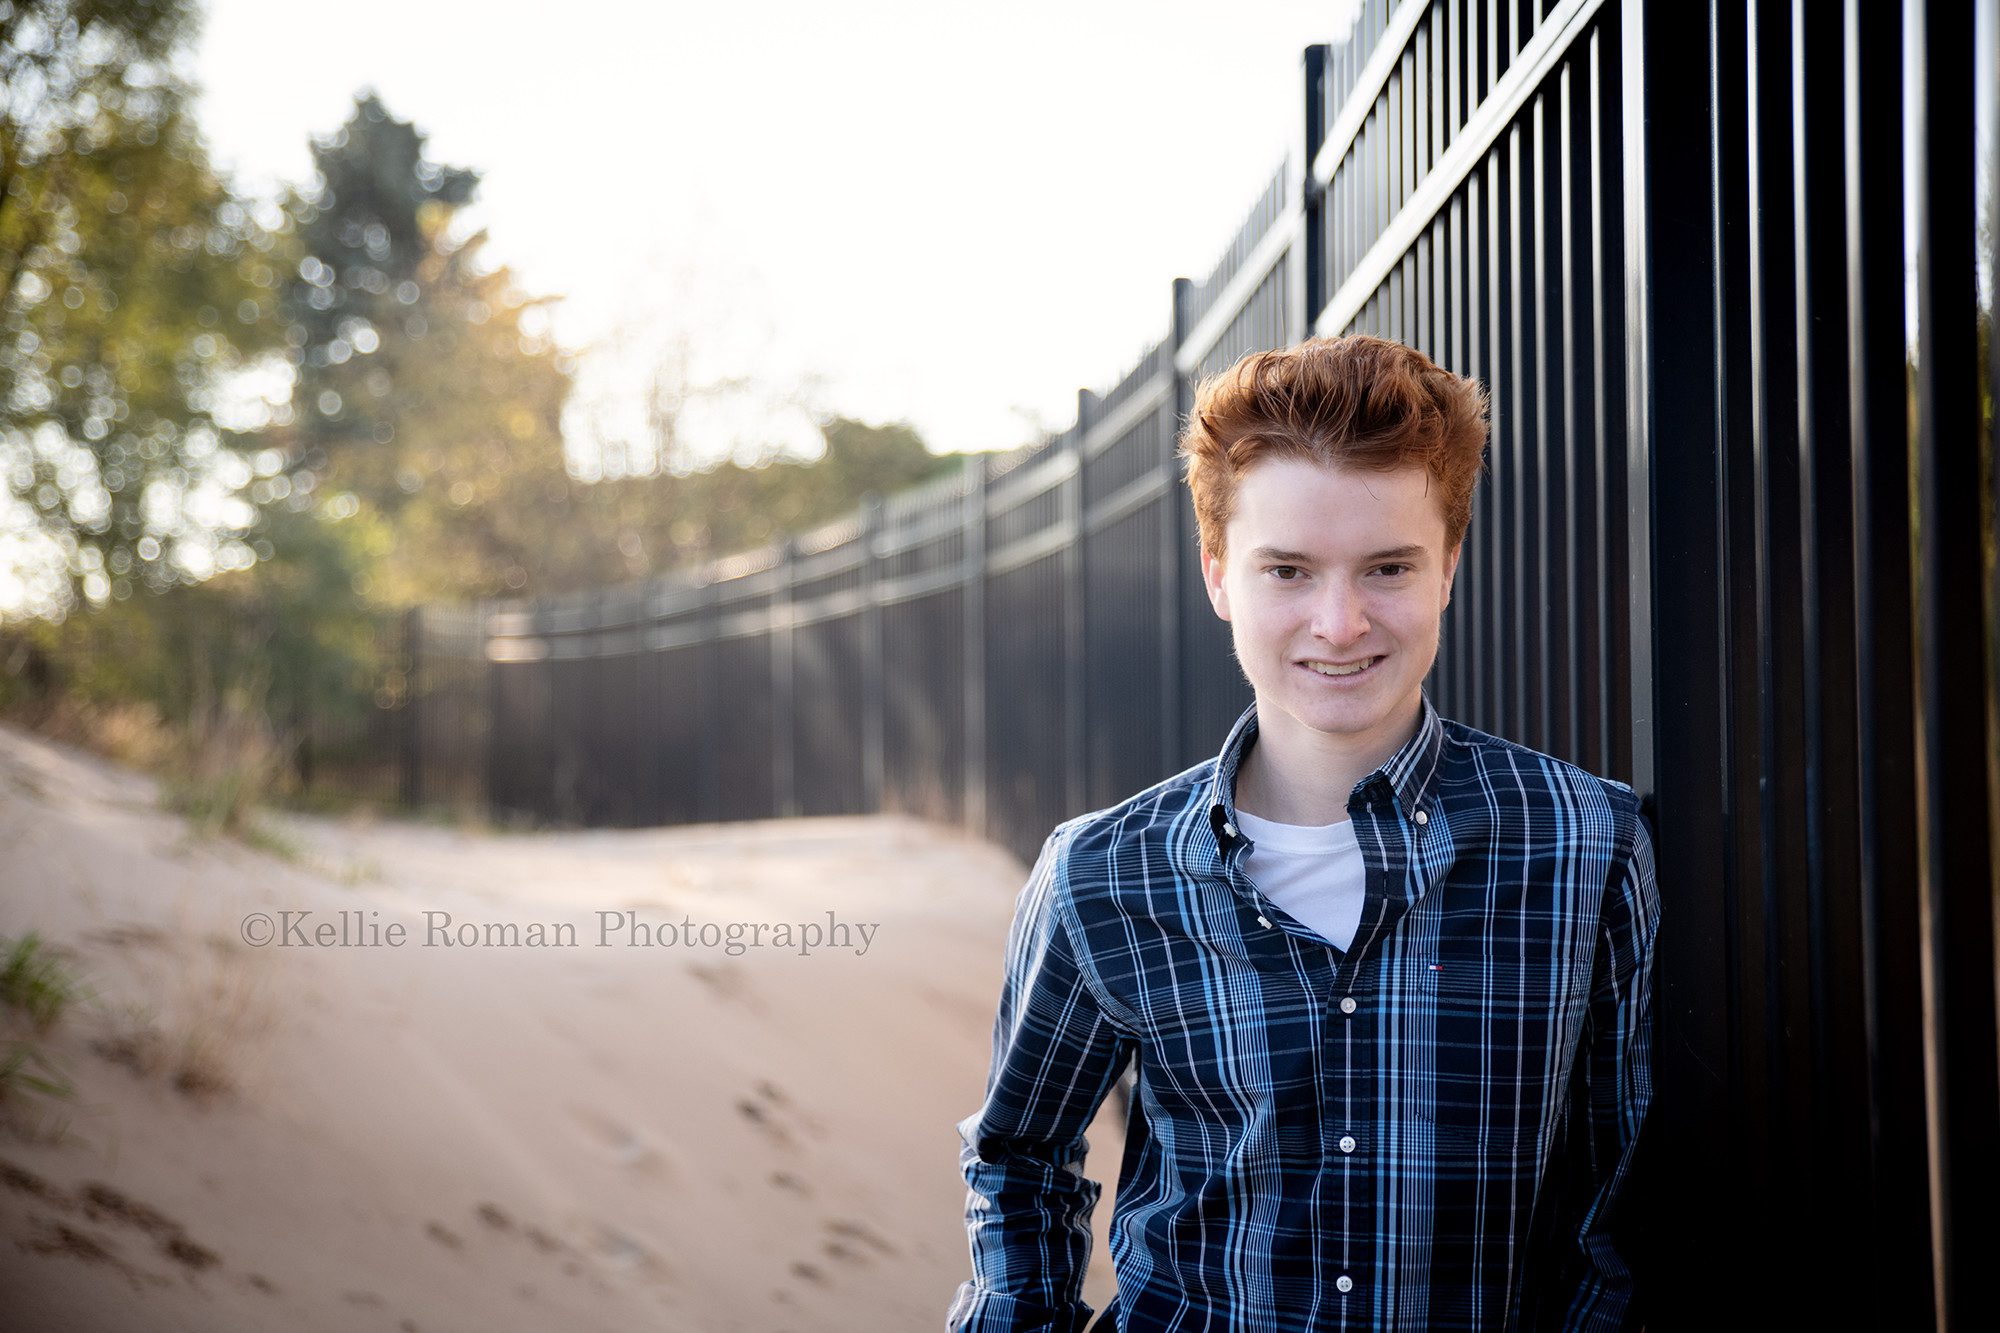 milwaukee photographer a high school senior boy is standing next to a rod iron black fence on the beach in kenosha Wisconsin there is stand behind him and he is wearing a black and blue plaid shirt he has red hair and is looking into the camera